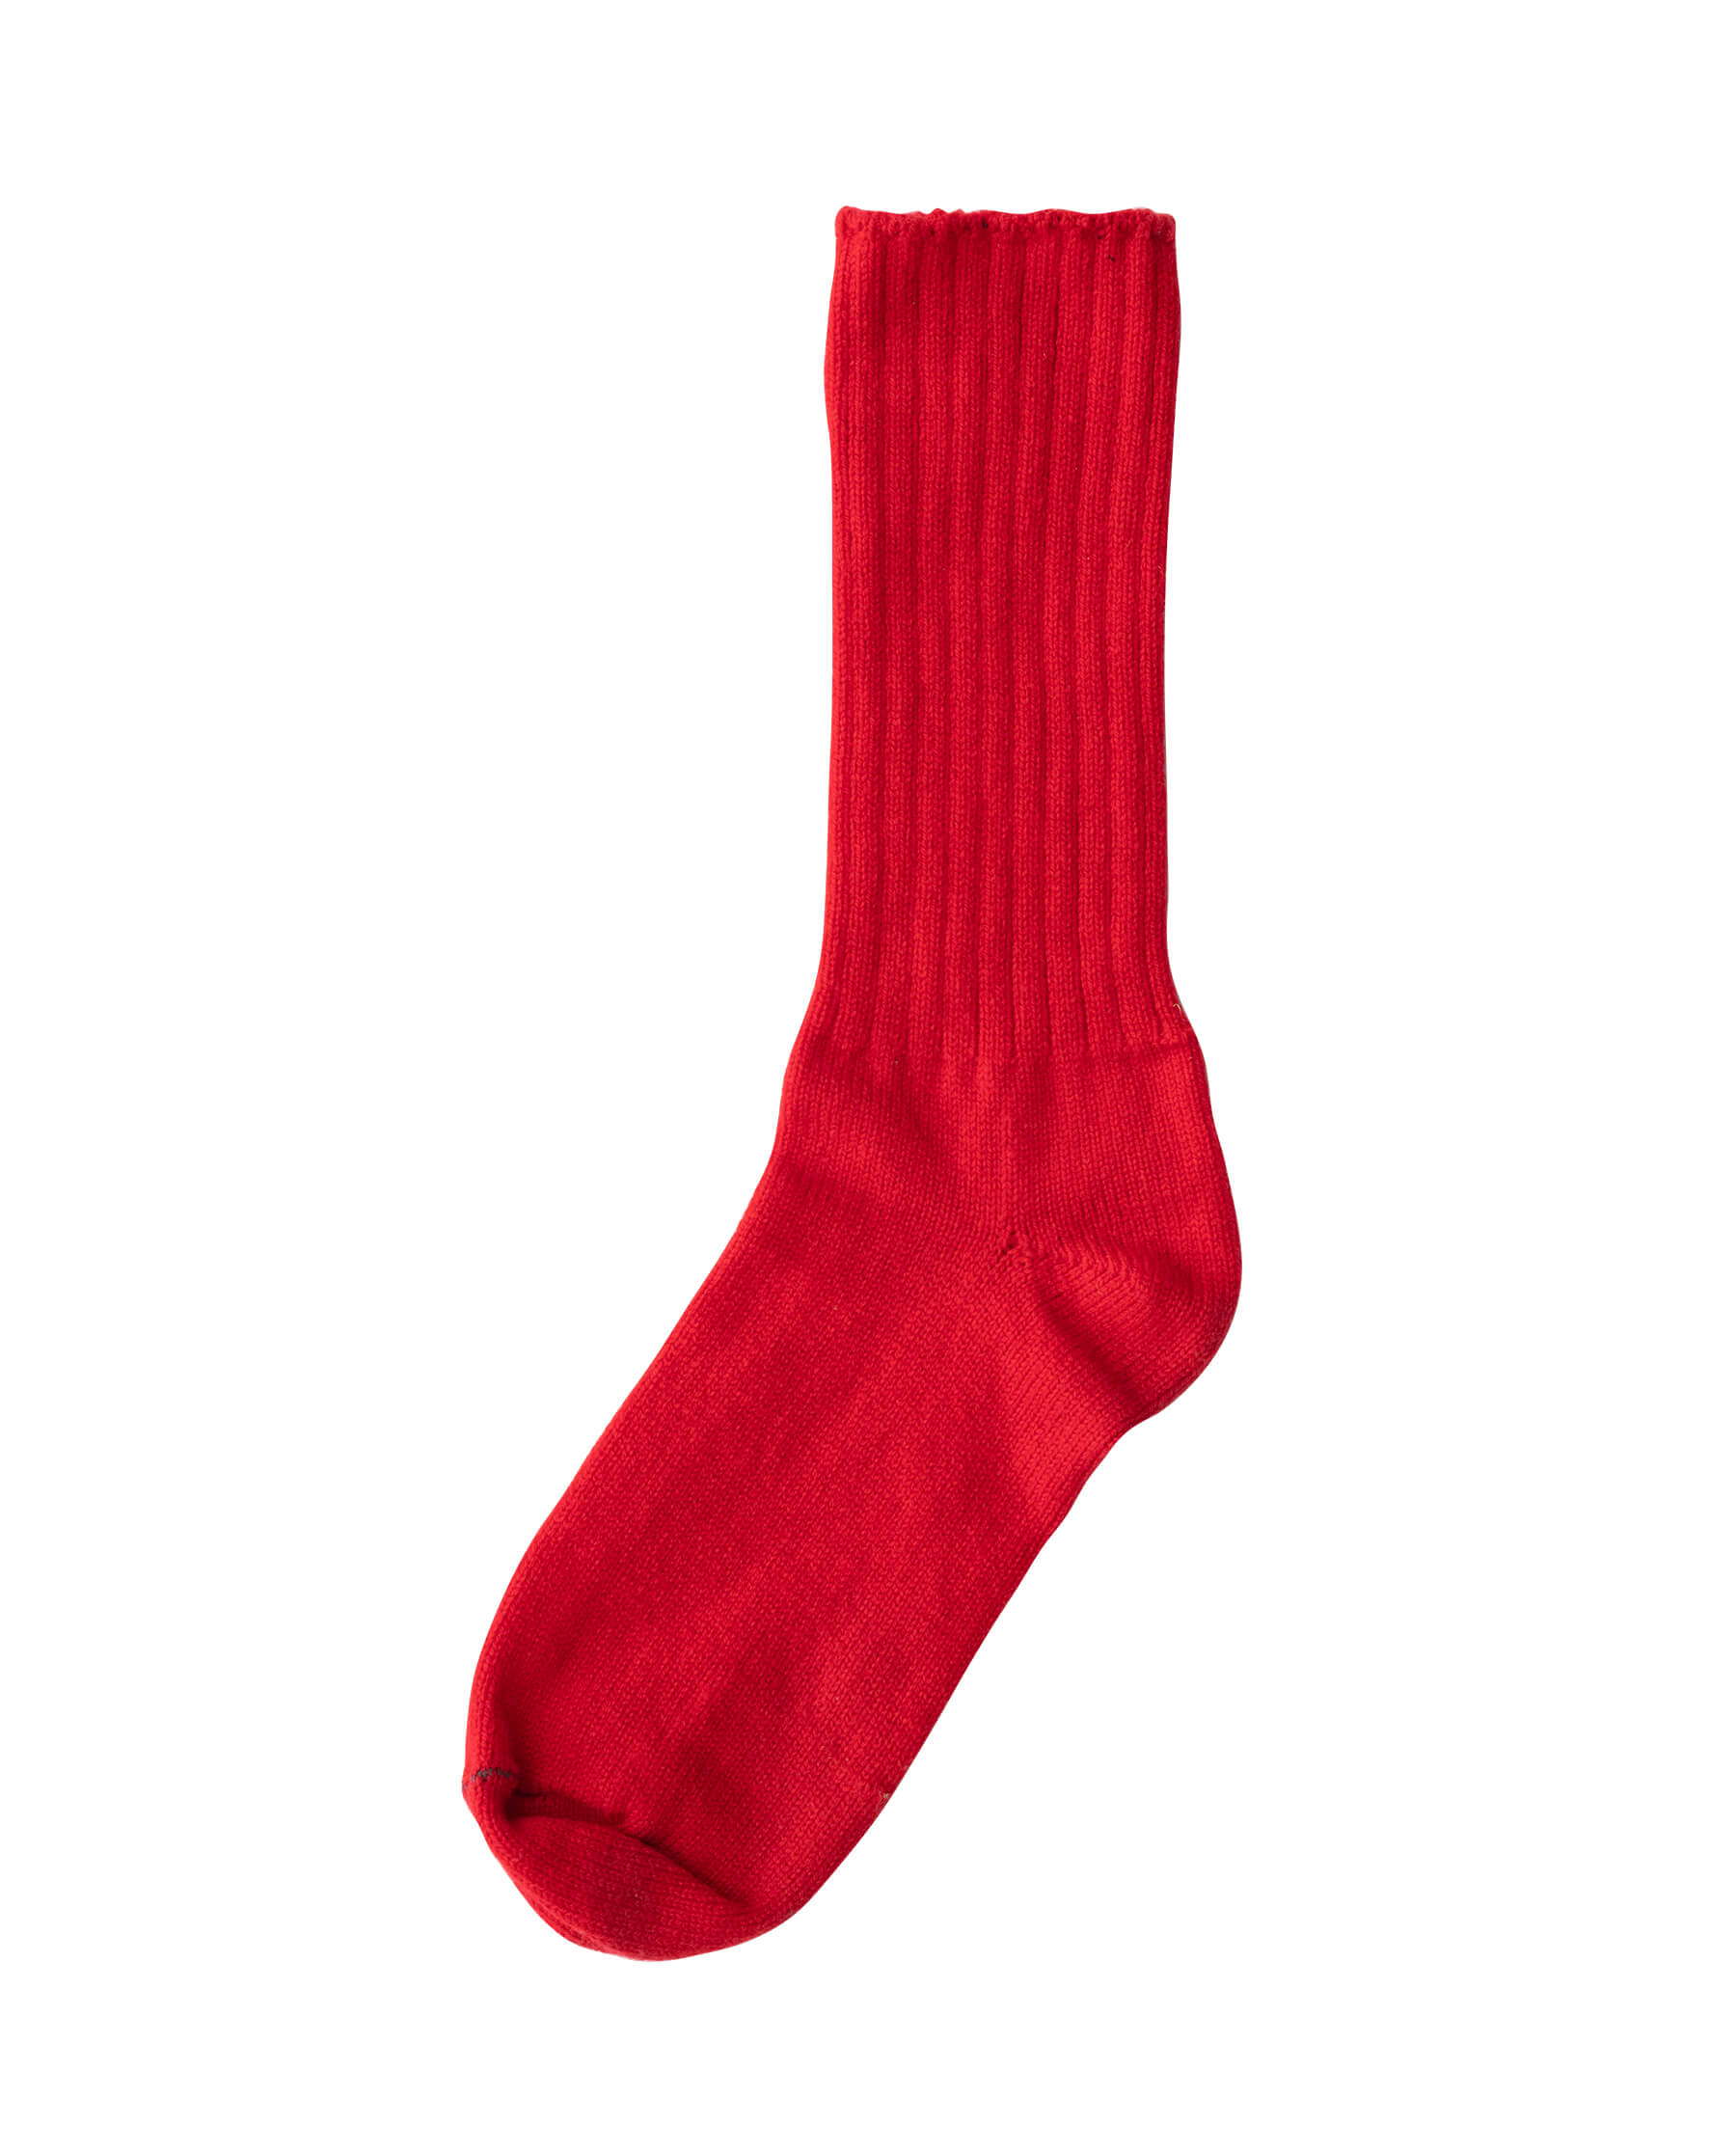 The Cashmere Sock. -- Bright Red SOCKS THE GREAT. HOL 22 D2 CASHMERE